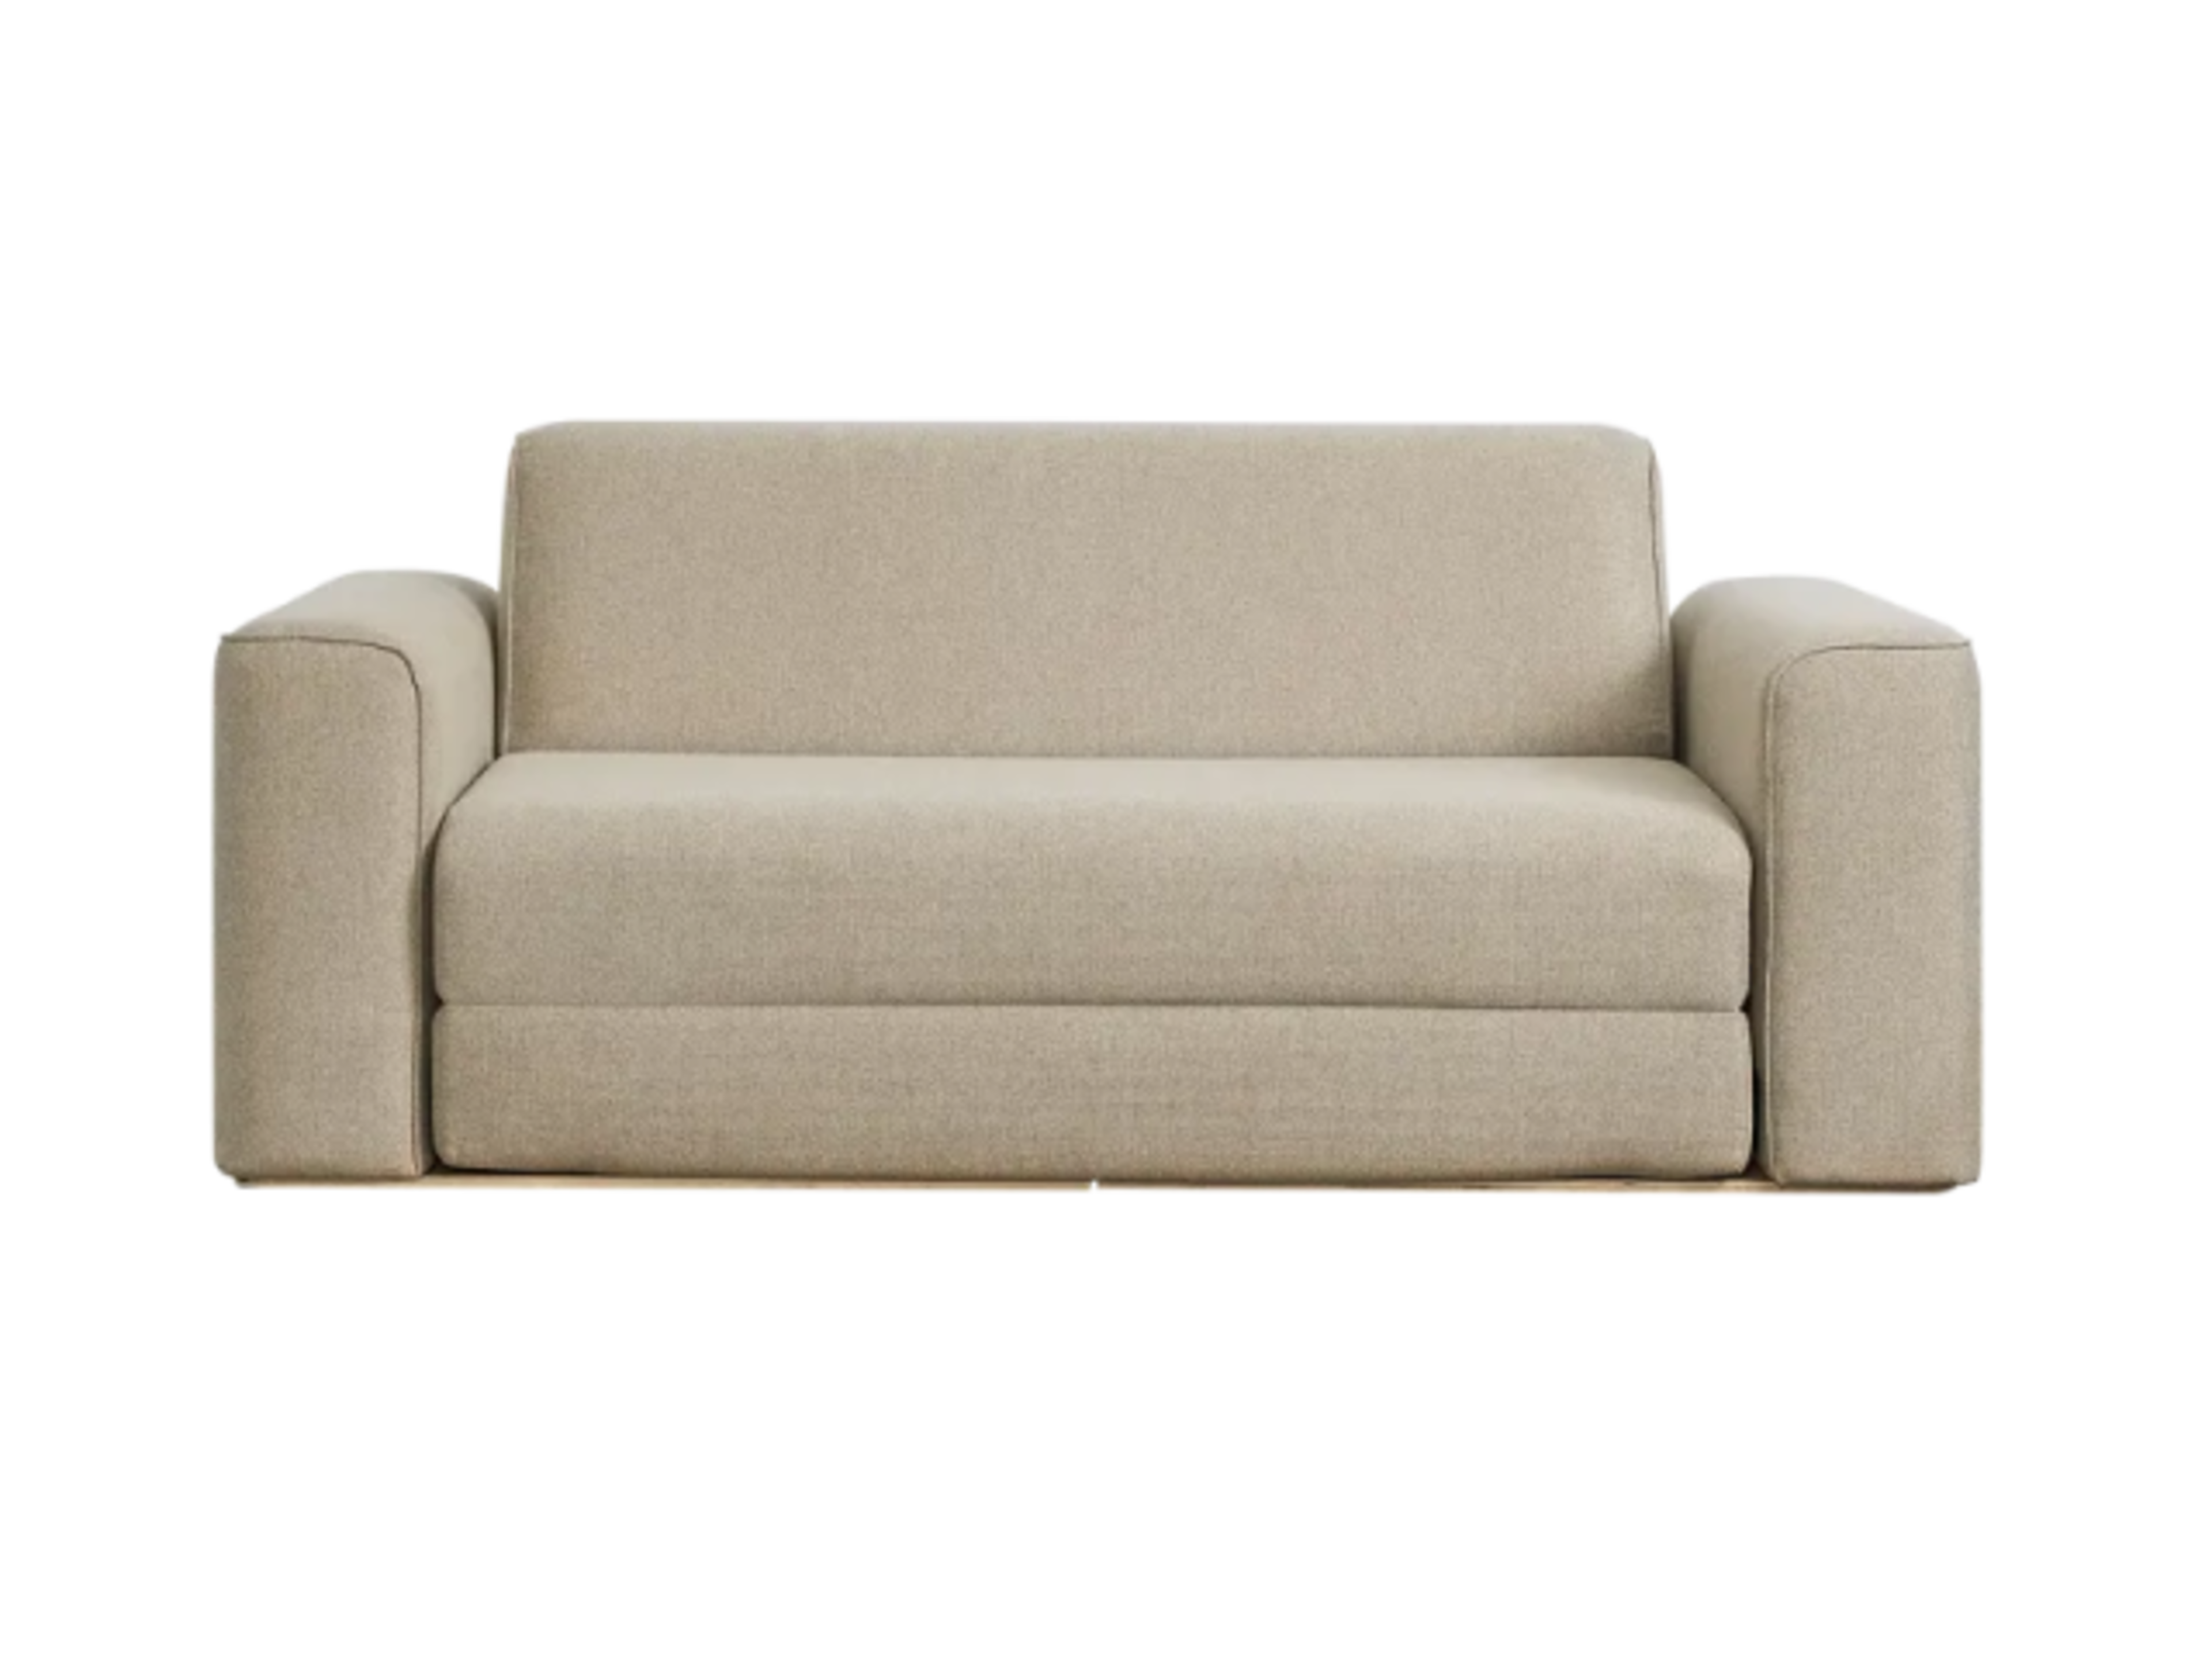 Sofa Bed Flat White Queen